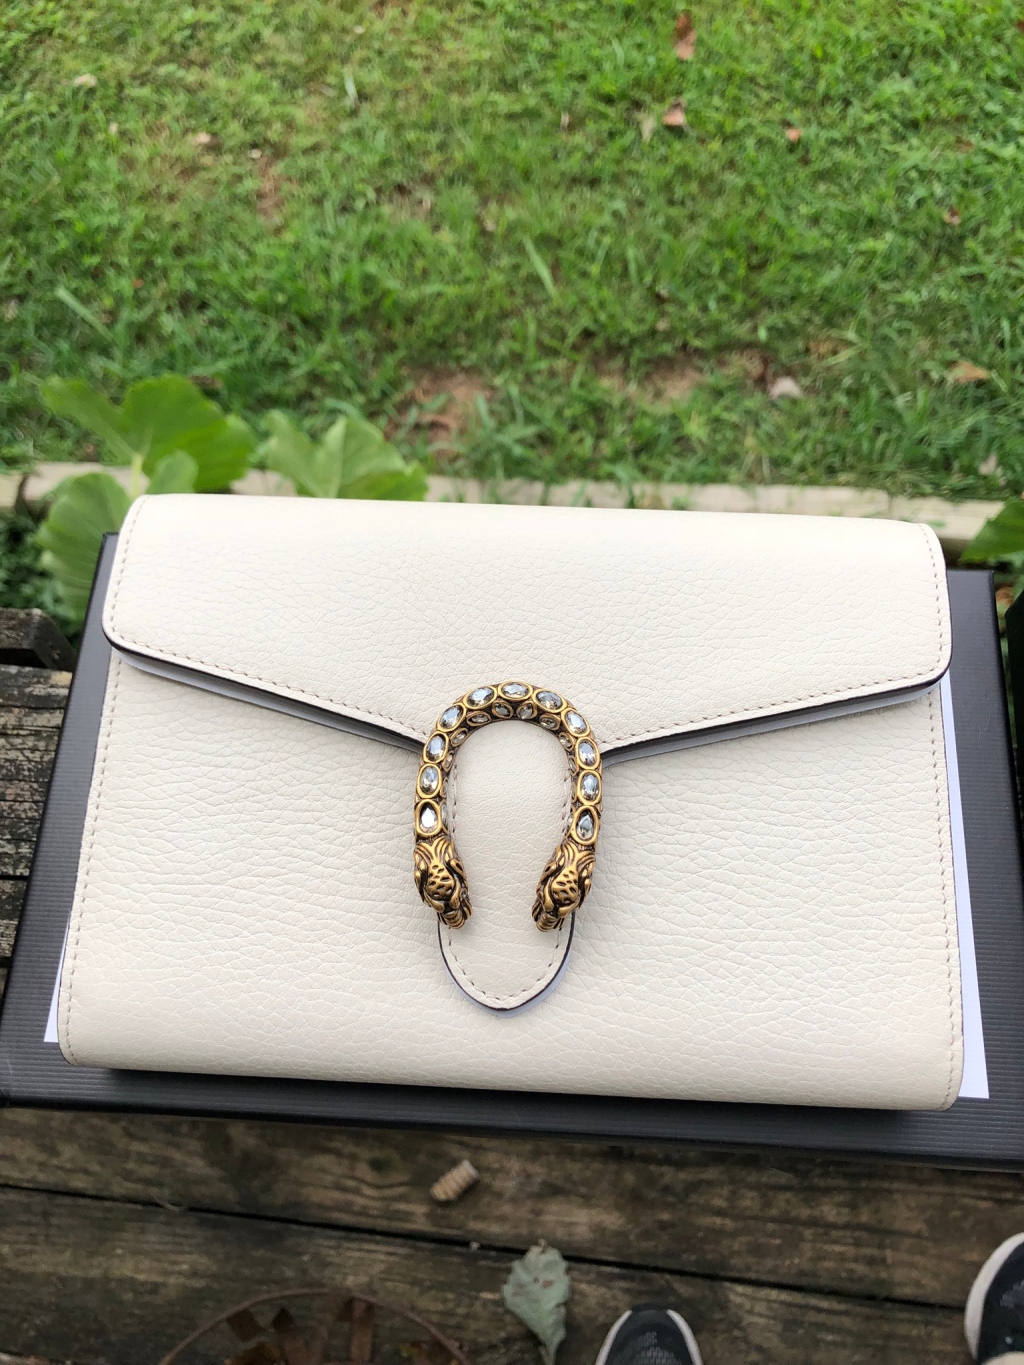 [Review] Gucci Dionysus leather mini chain bag